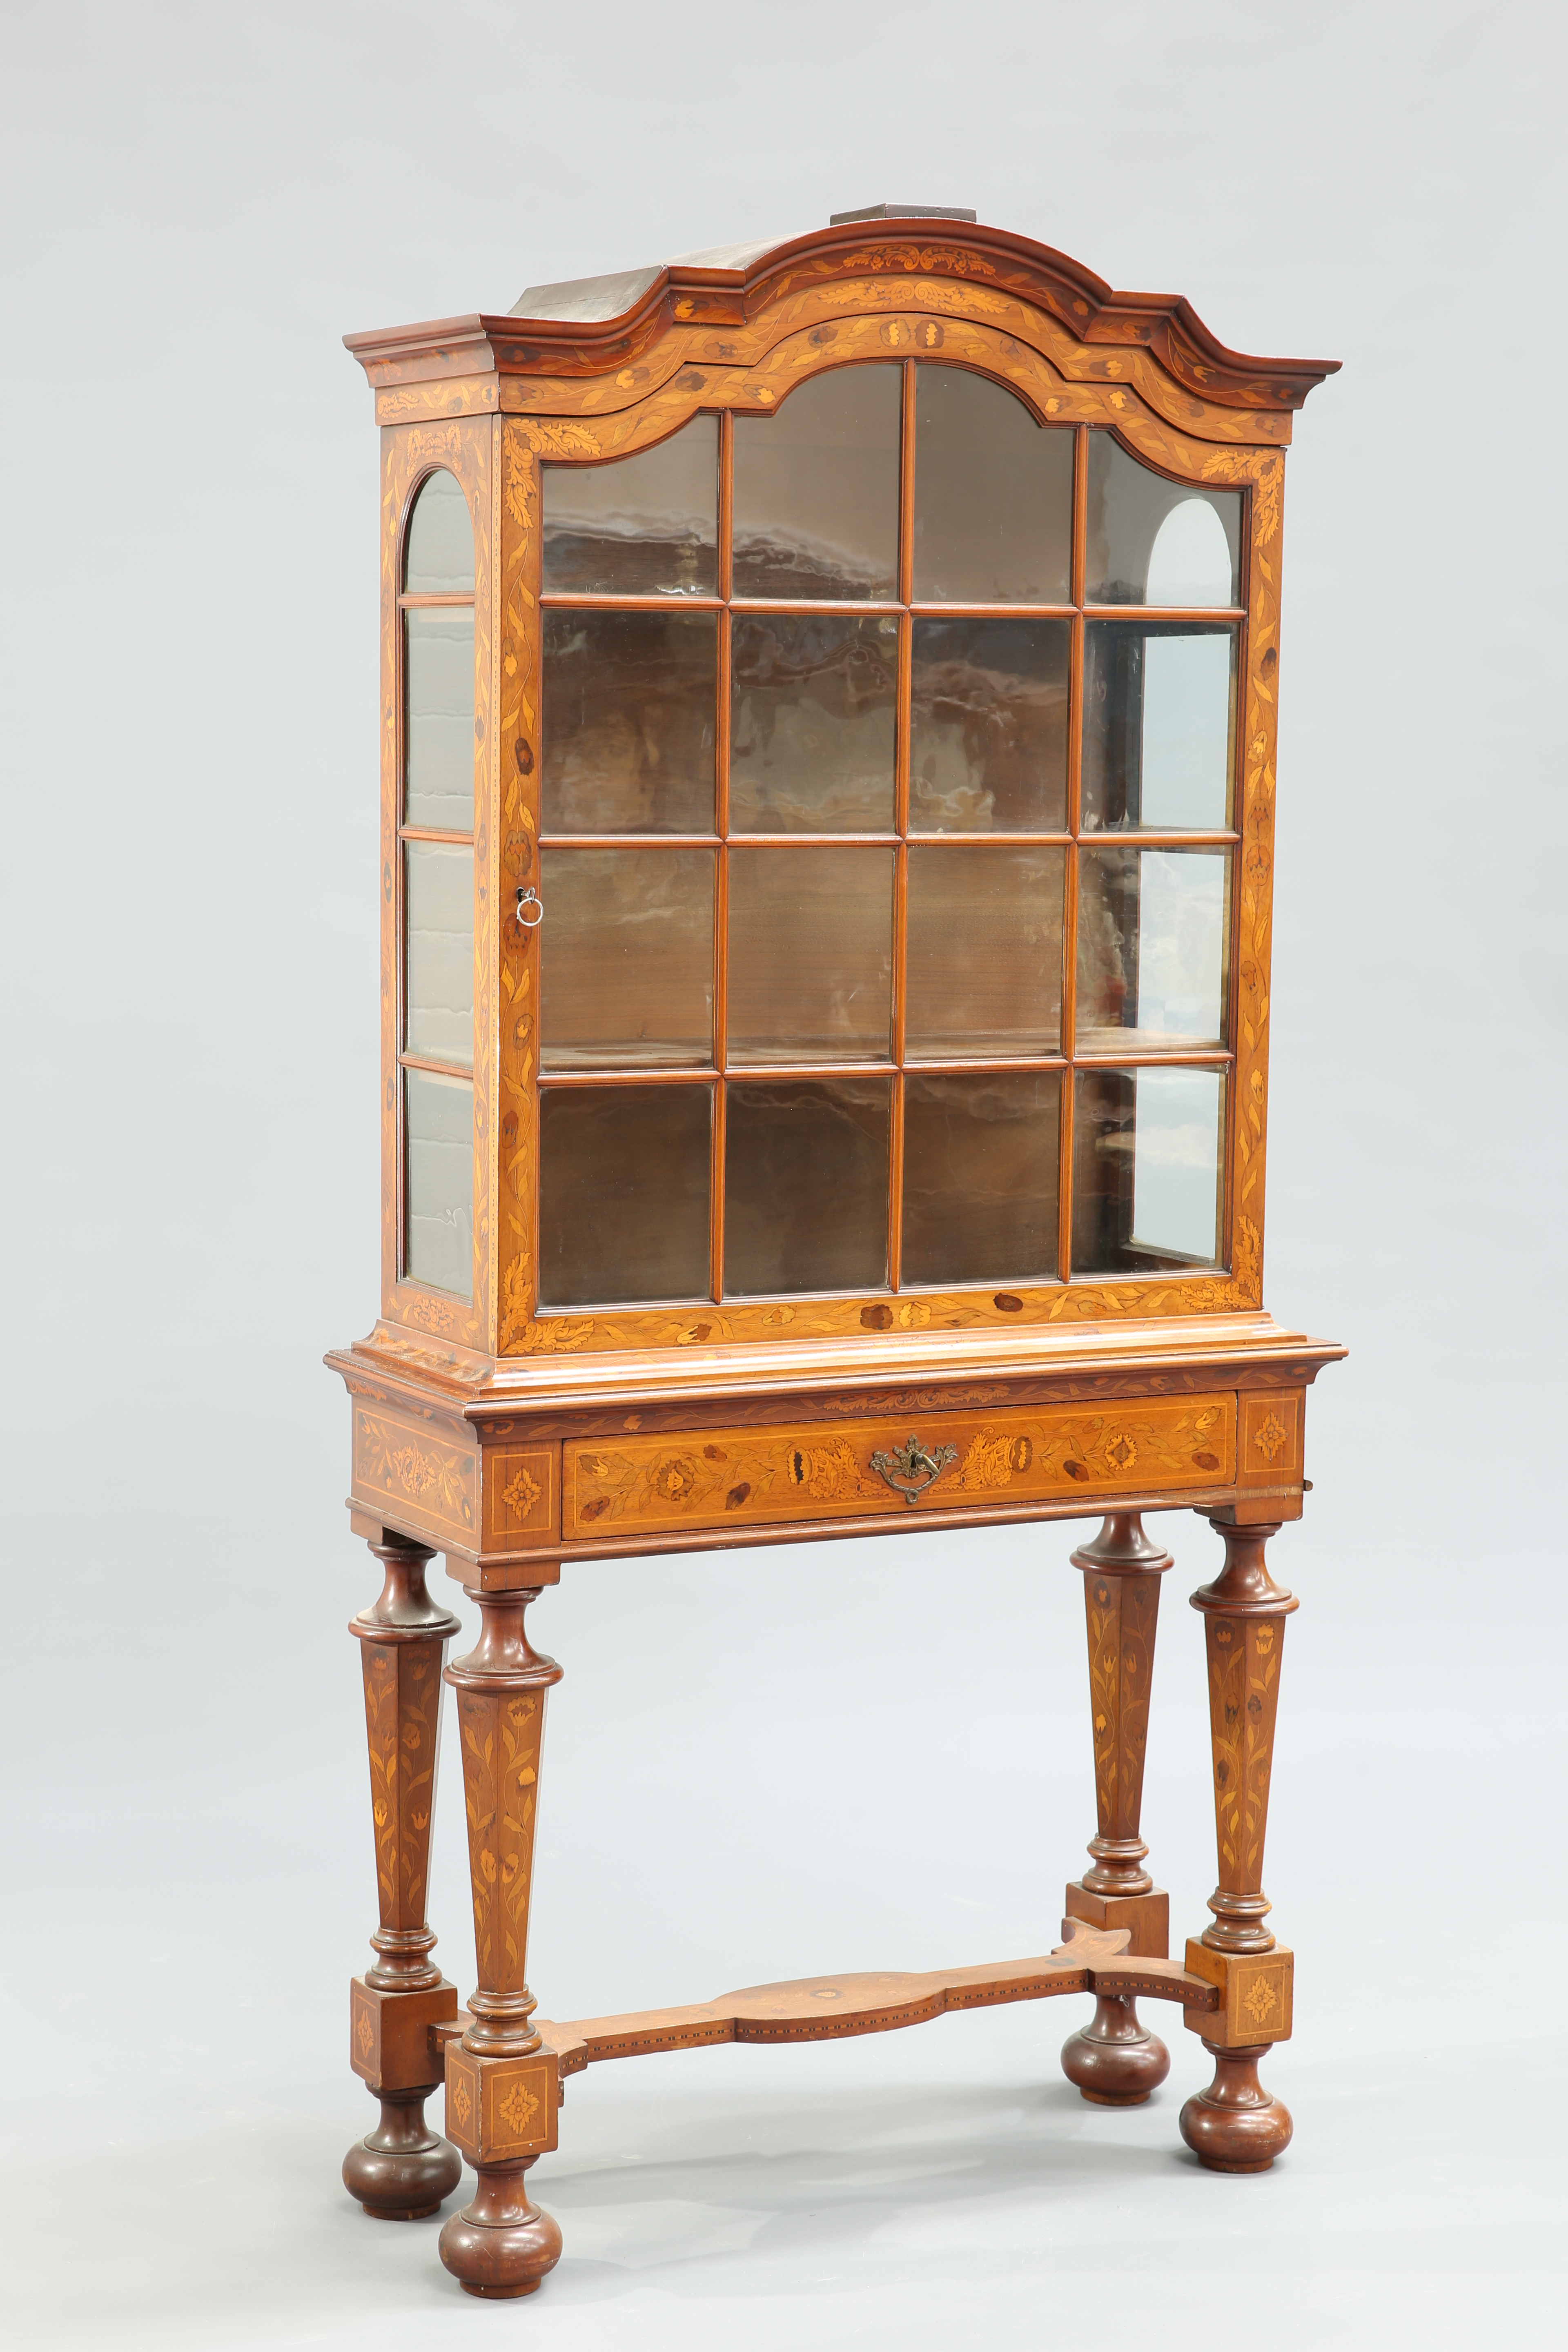 A 19TH CENTURY CONTINENTAL FLORAL MARQUETRY WALNUT CABINET ON STAND